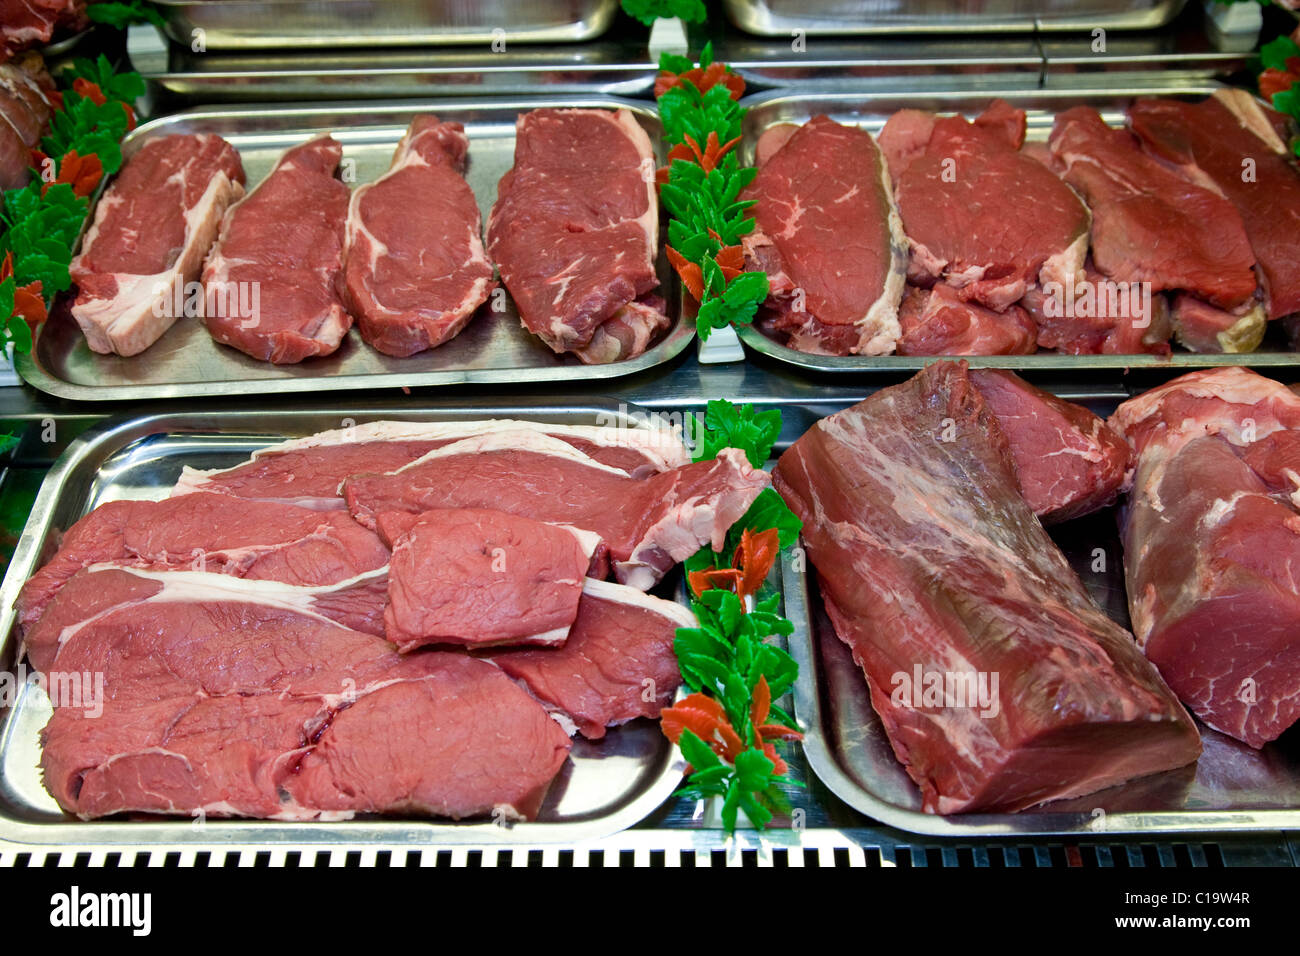 Cuts Of Beef On Display In A Butchers Shop C19W4R 